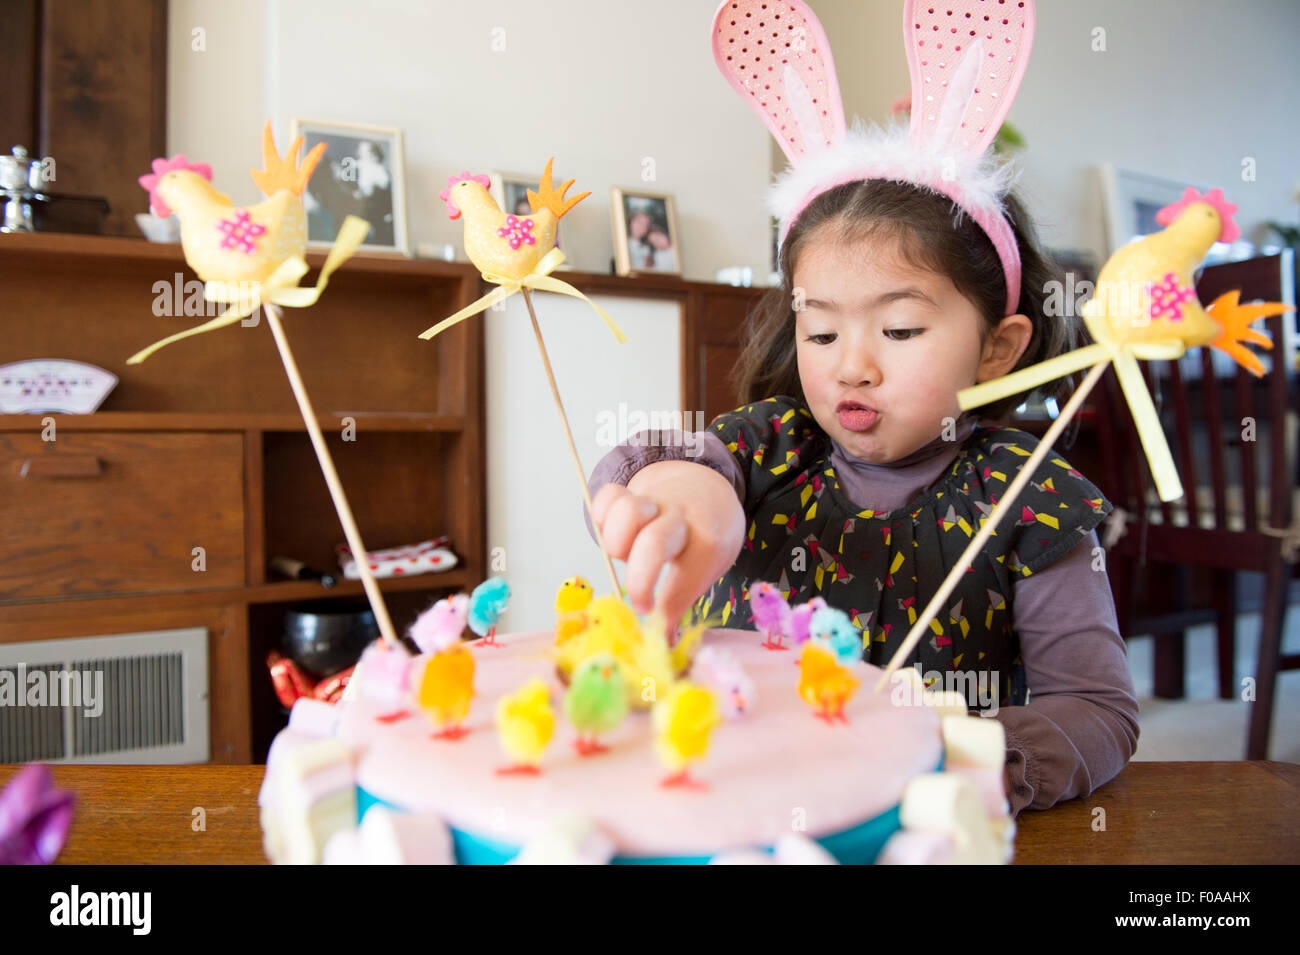 Young girl sitting at table, Easter cake in front of her Stock Photo